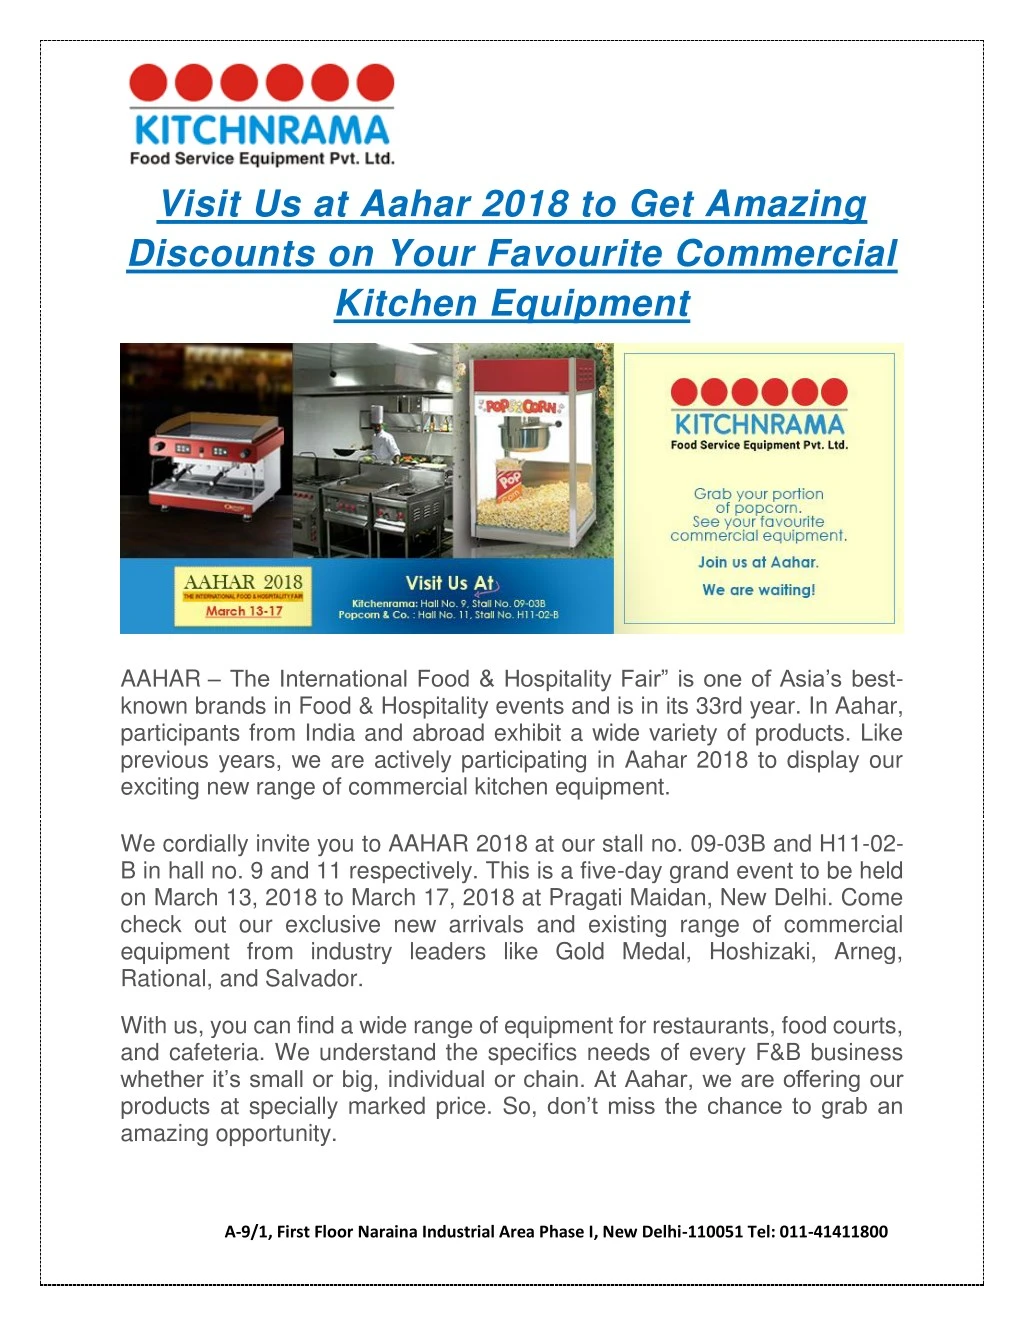 visit us at aahar 2018 to get amazing discounts